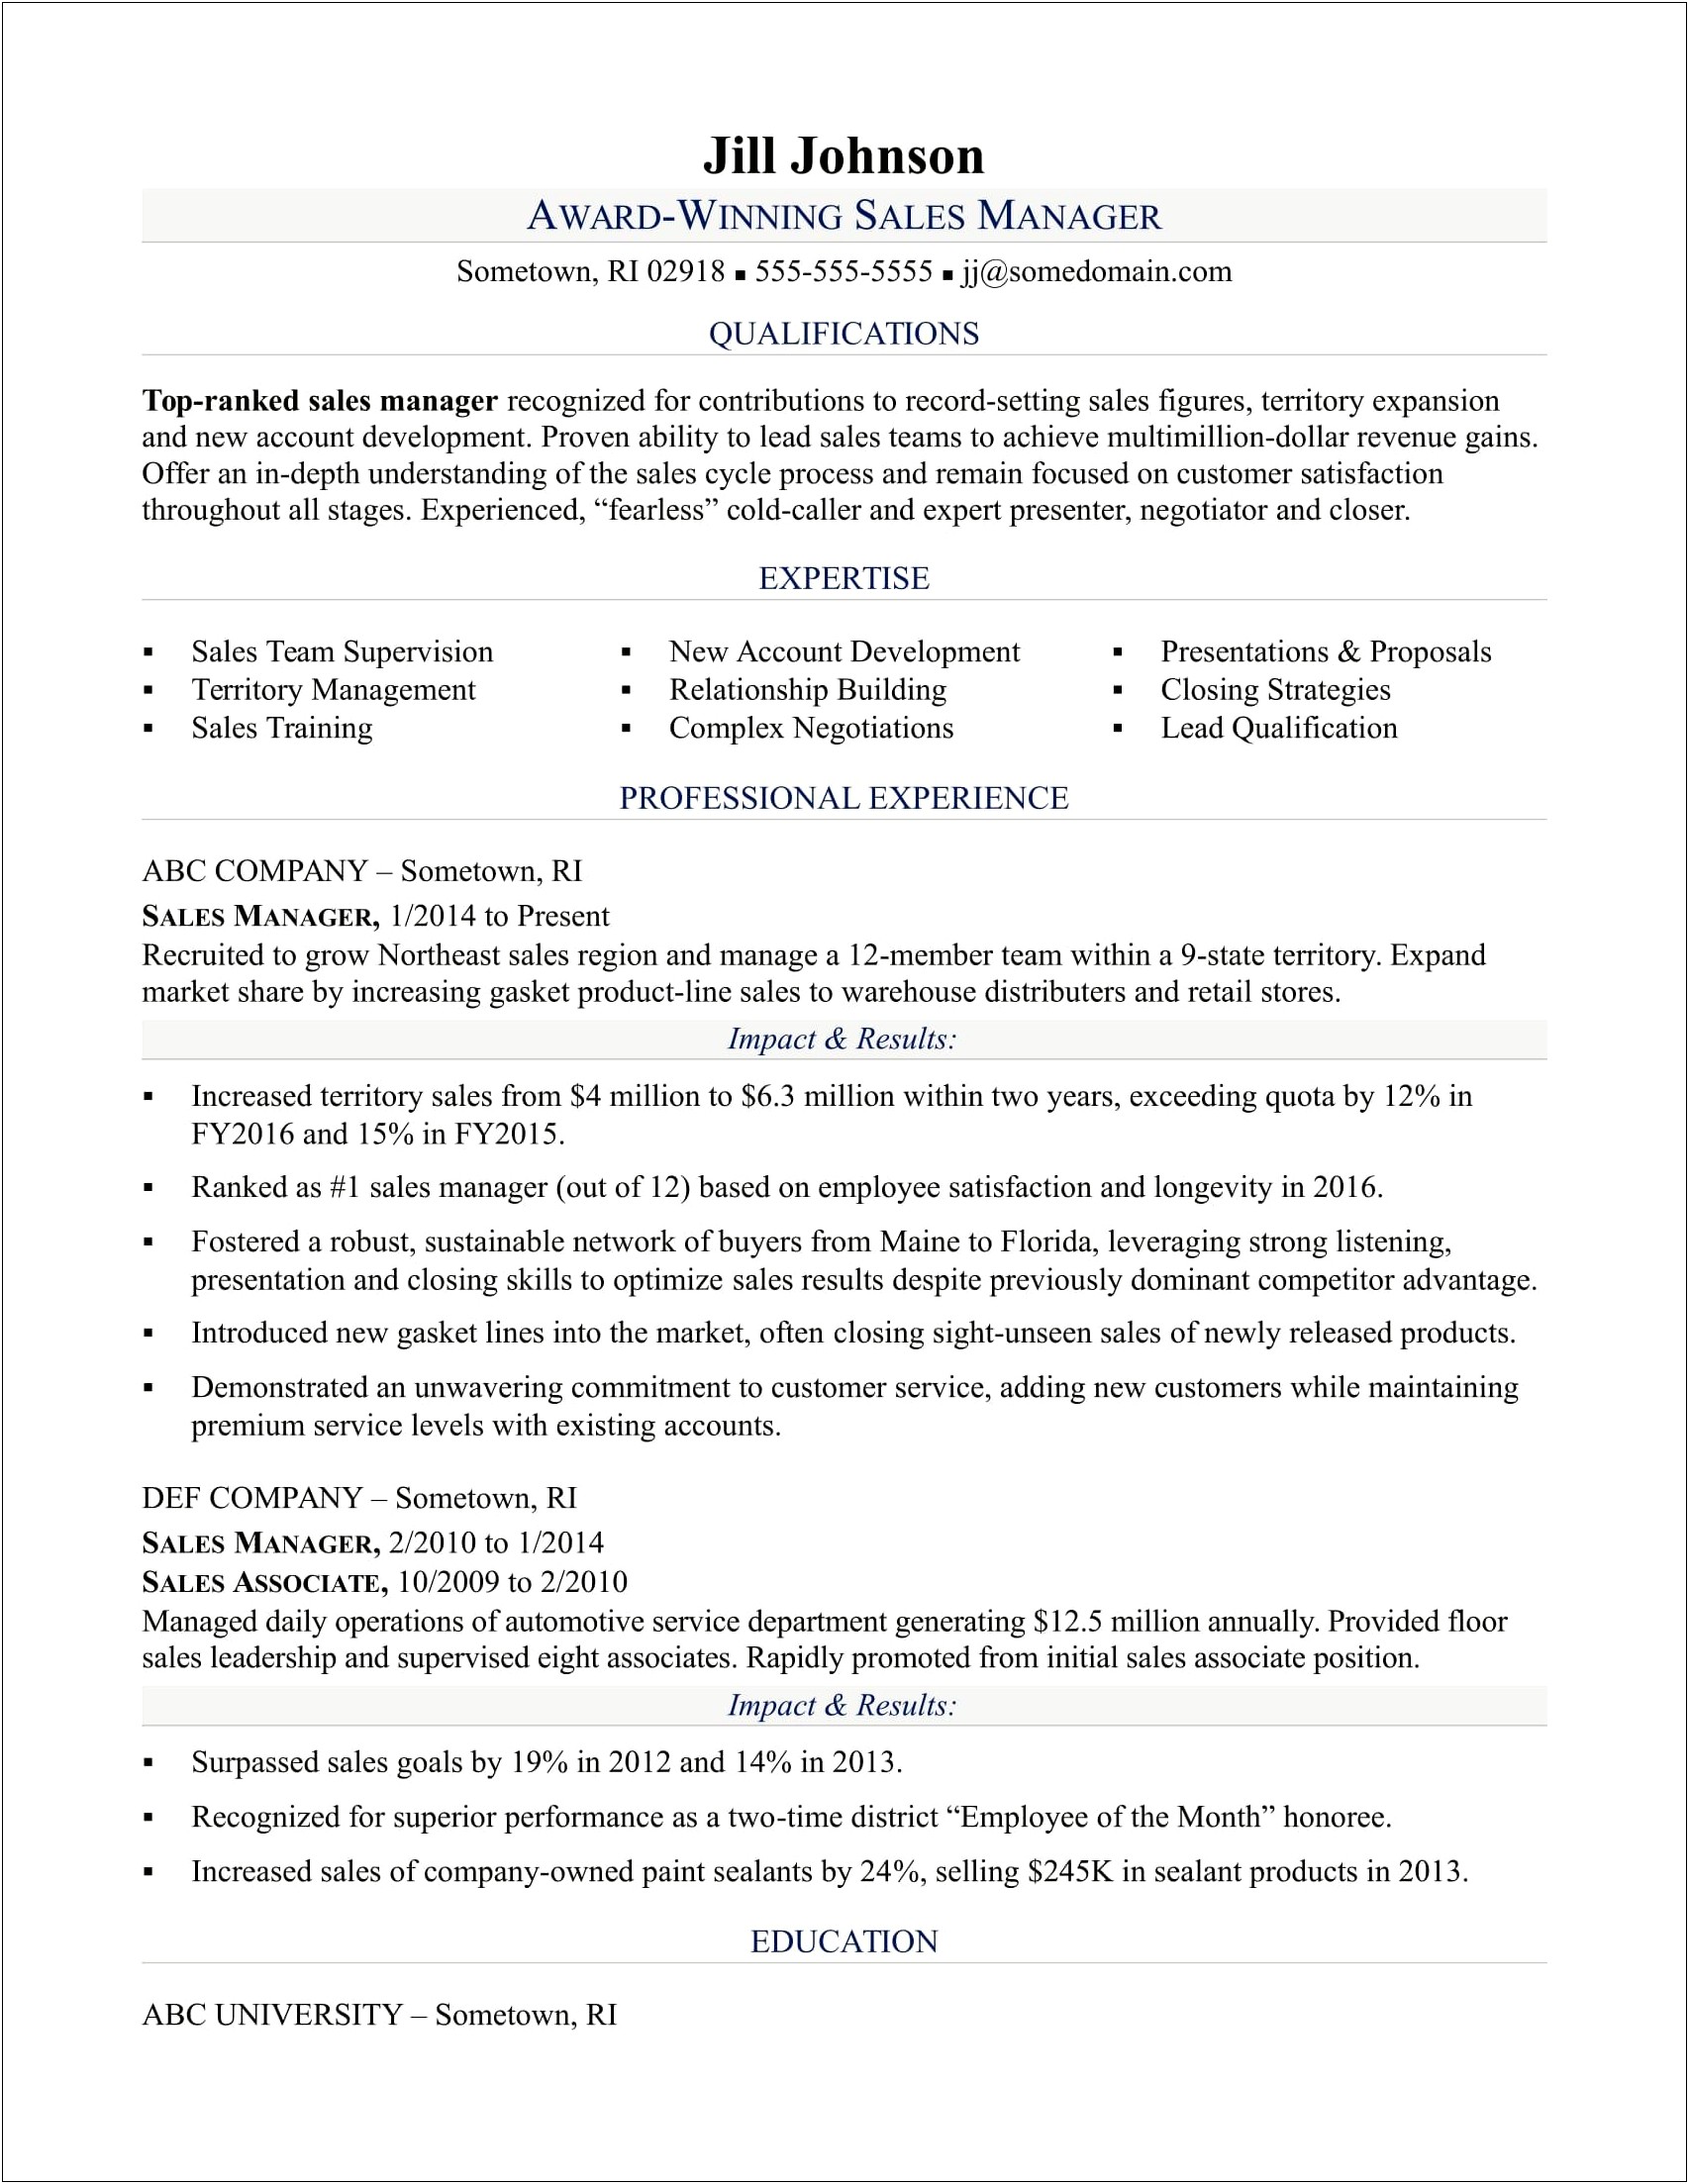 Format Of Multiple Jobs At Same Company Resume